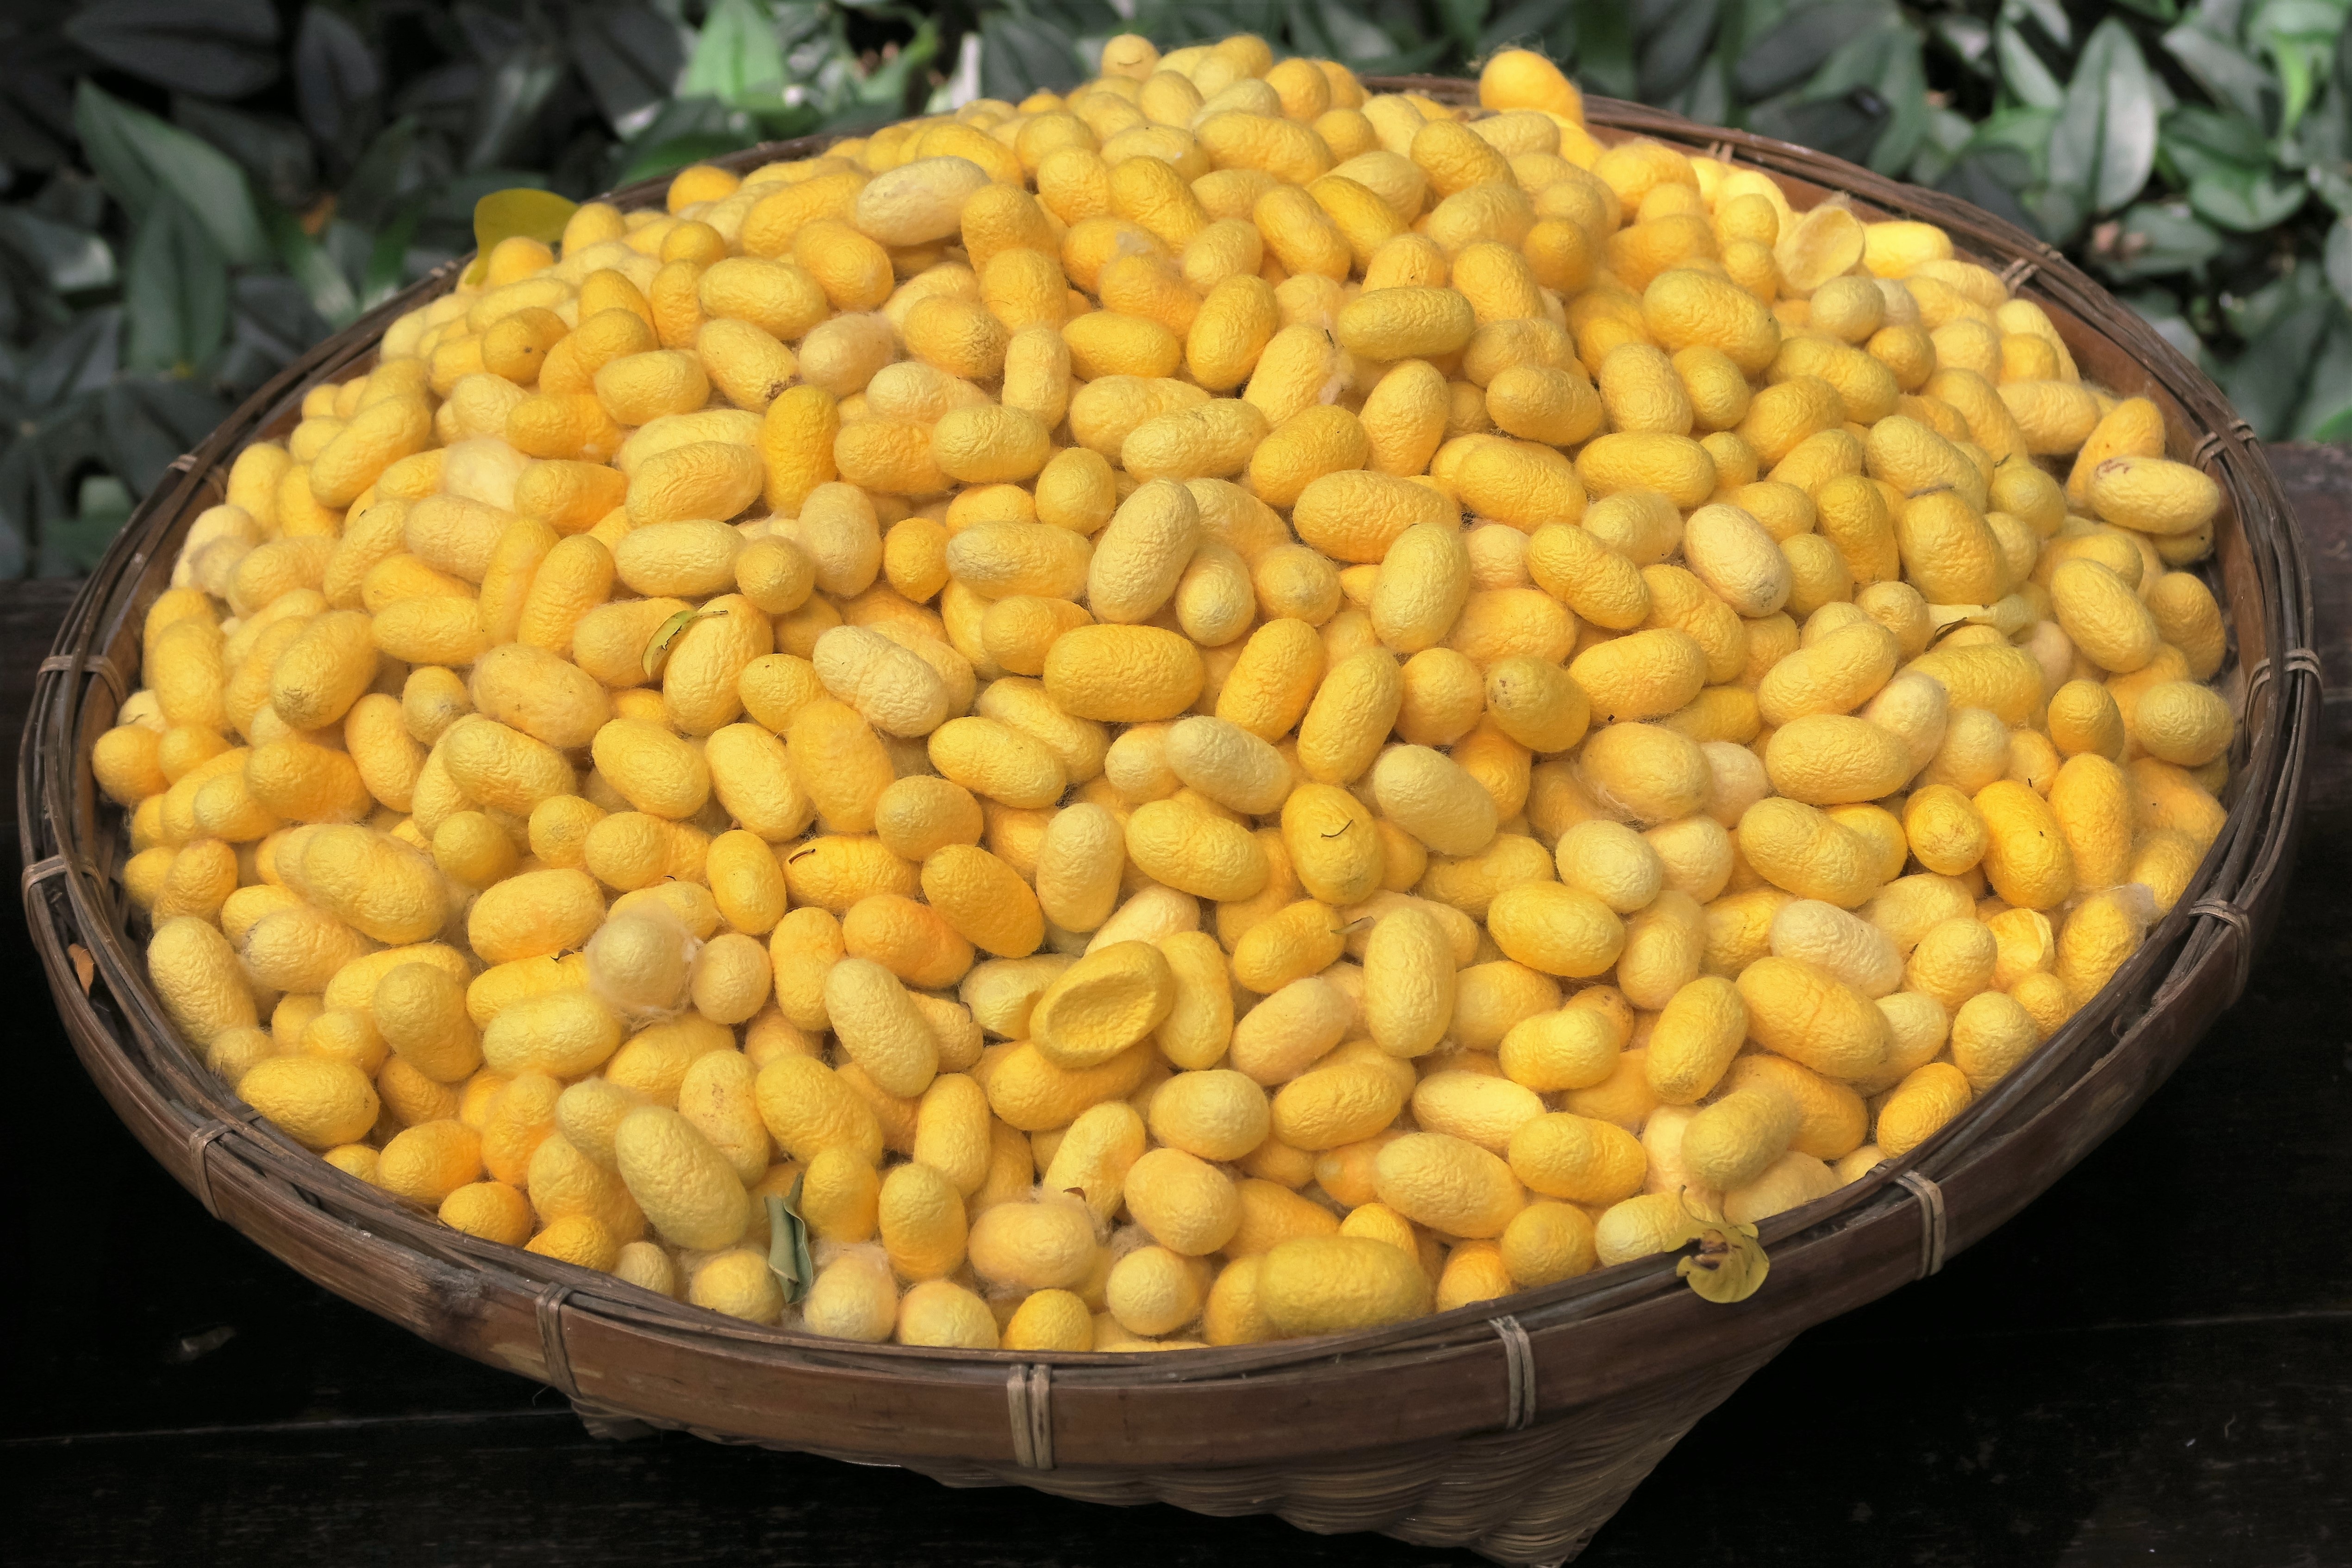 yellow small oval fruits